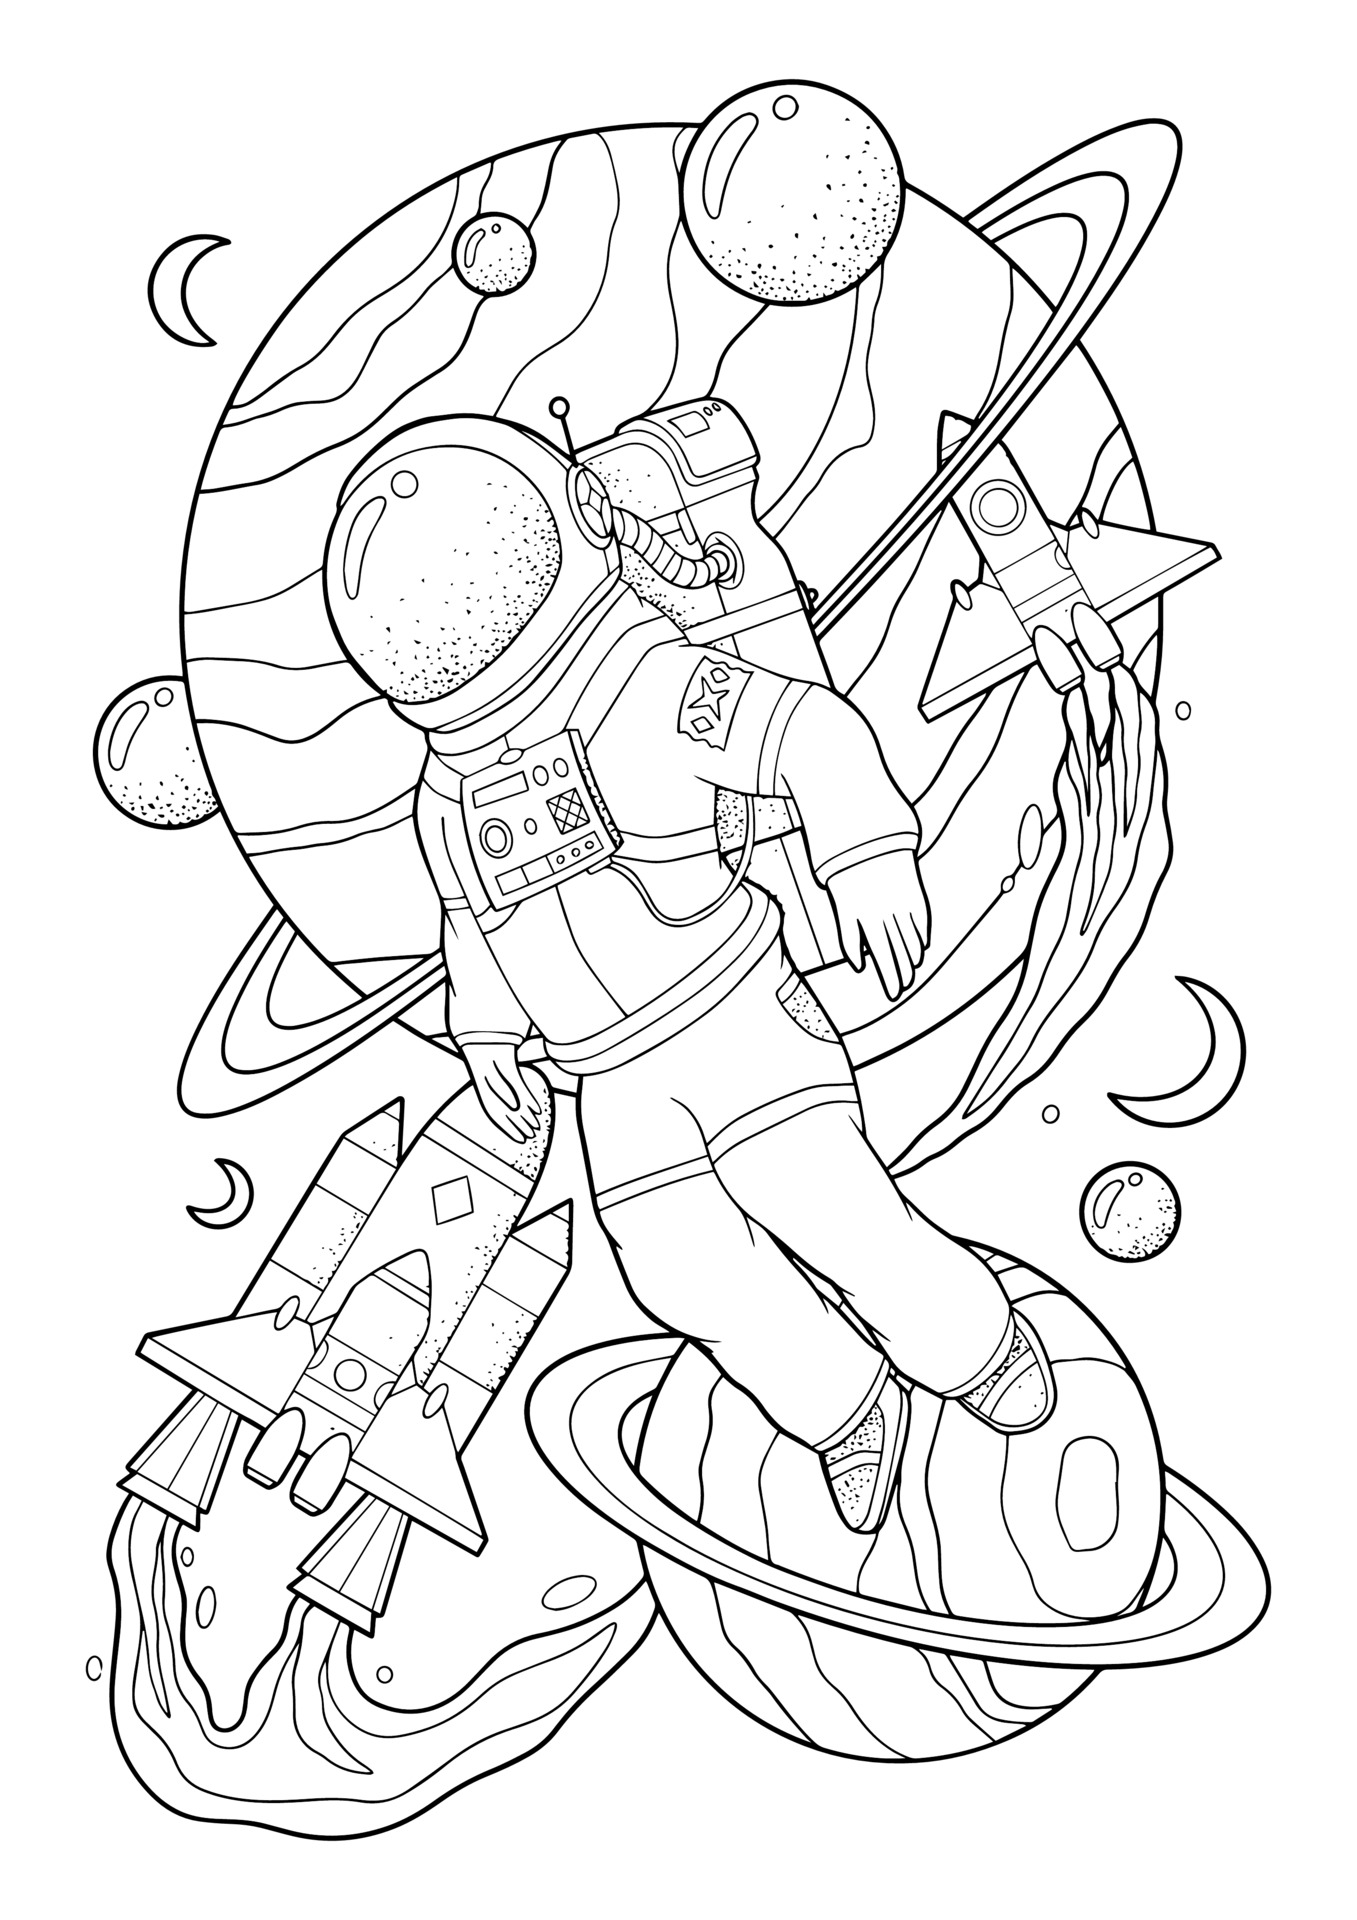 Coloring pages for kids of astronauts in outer space 20 ...